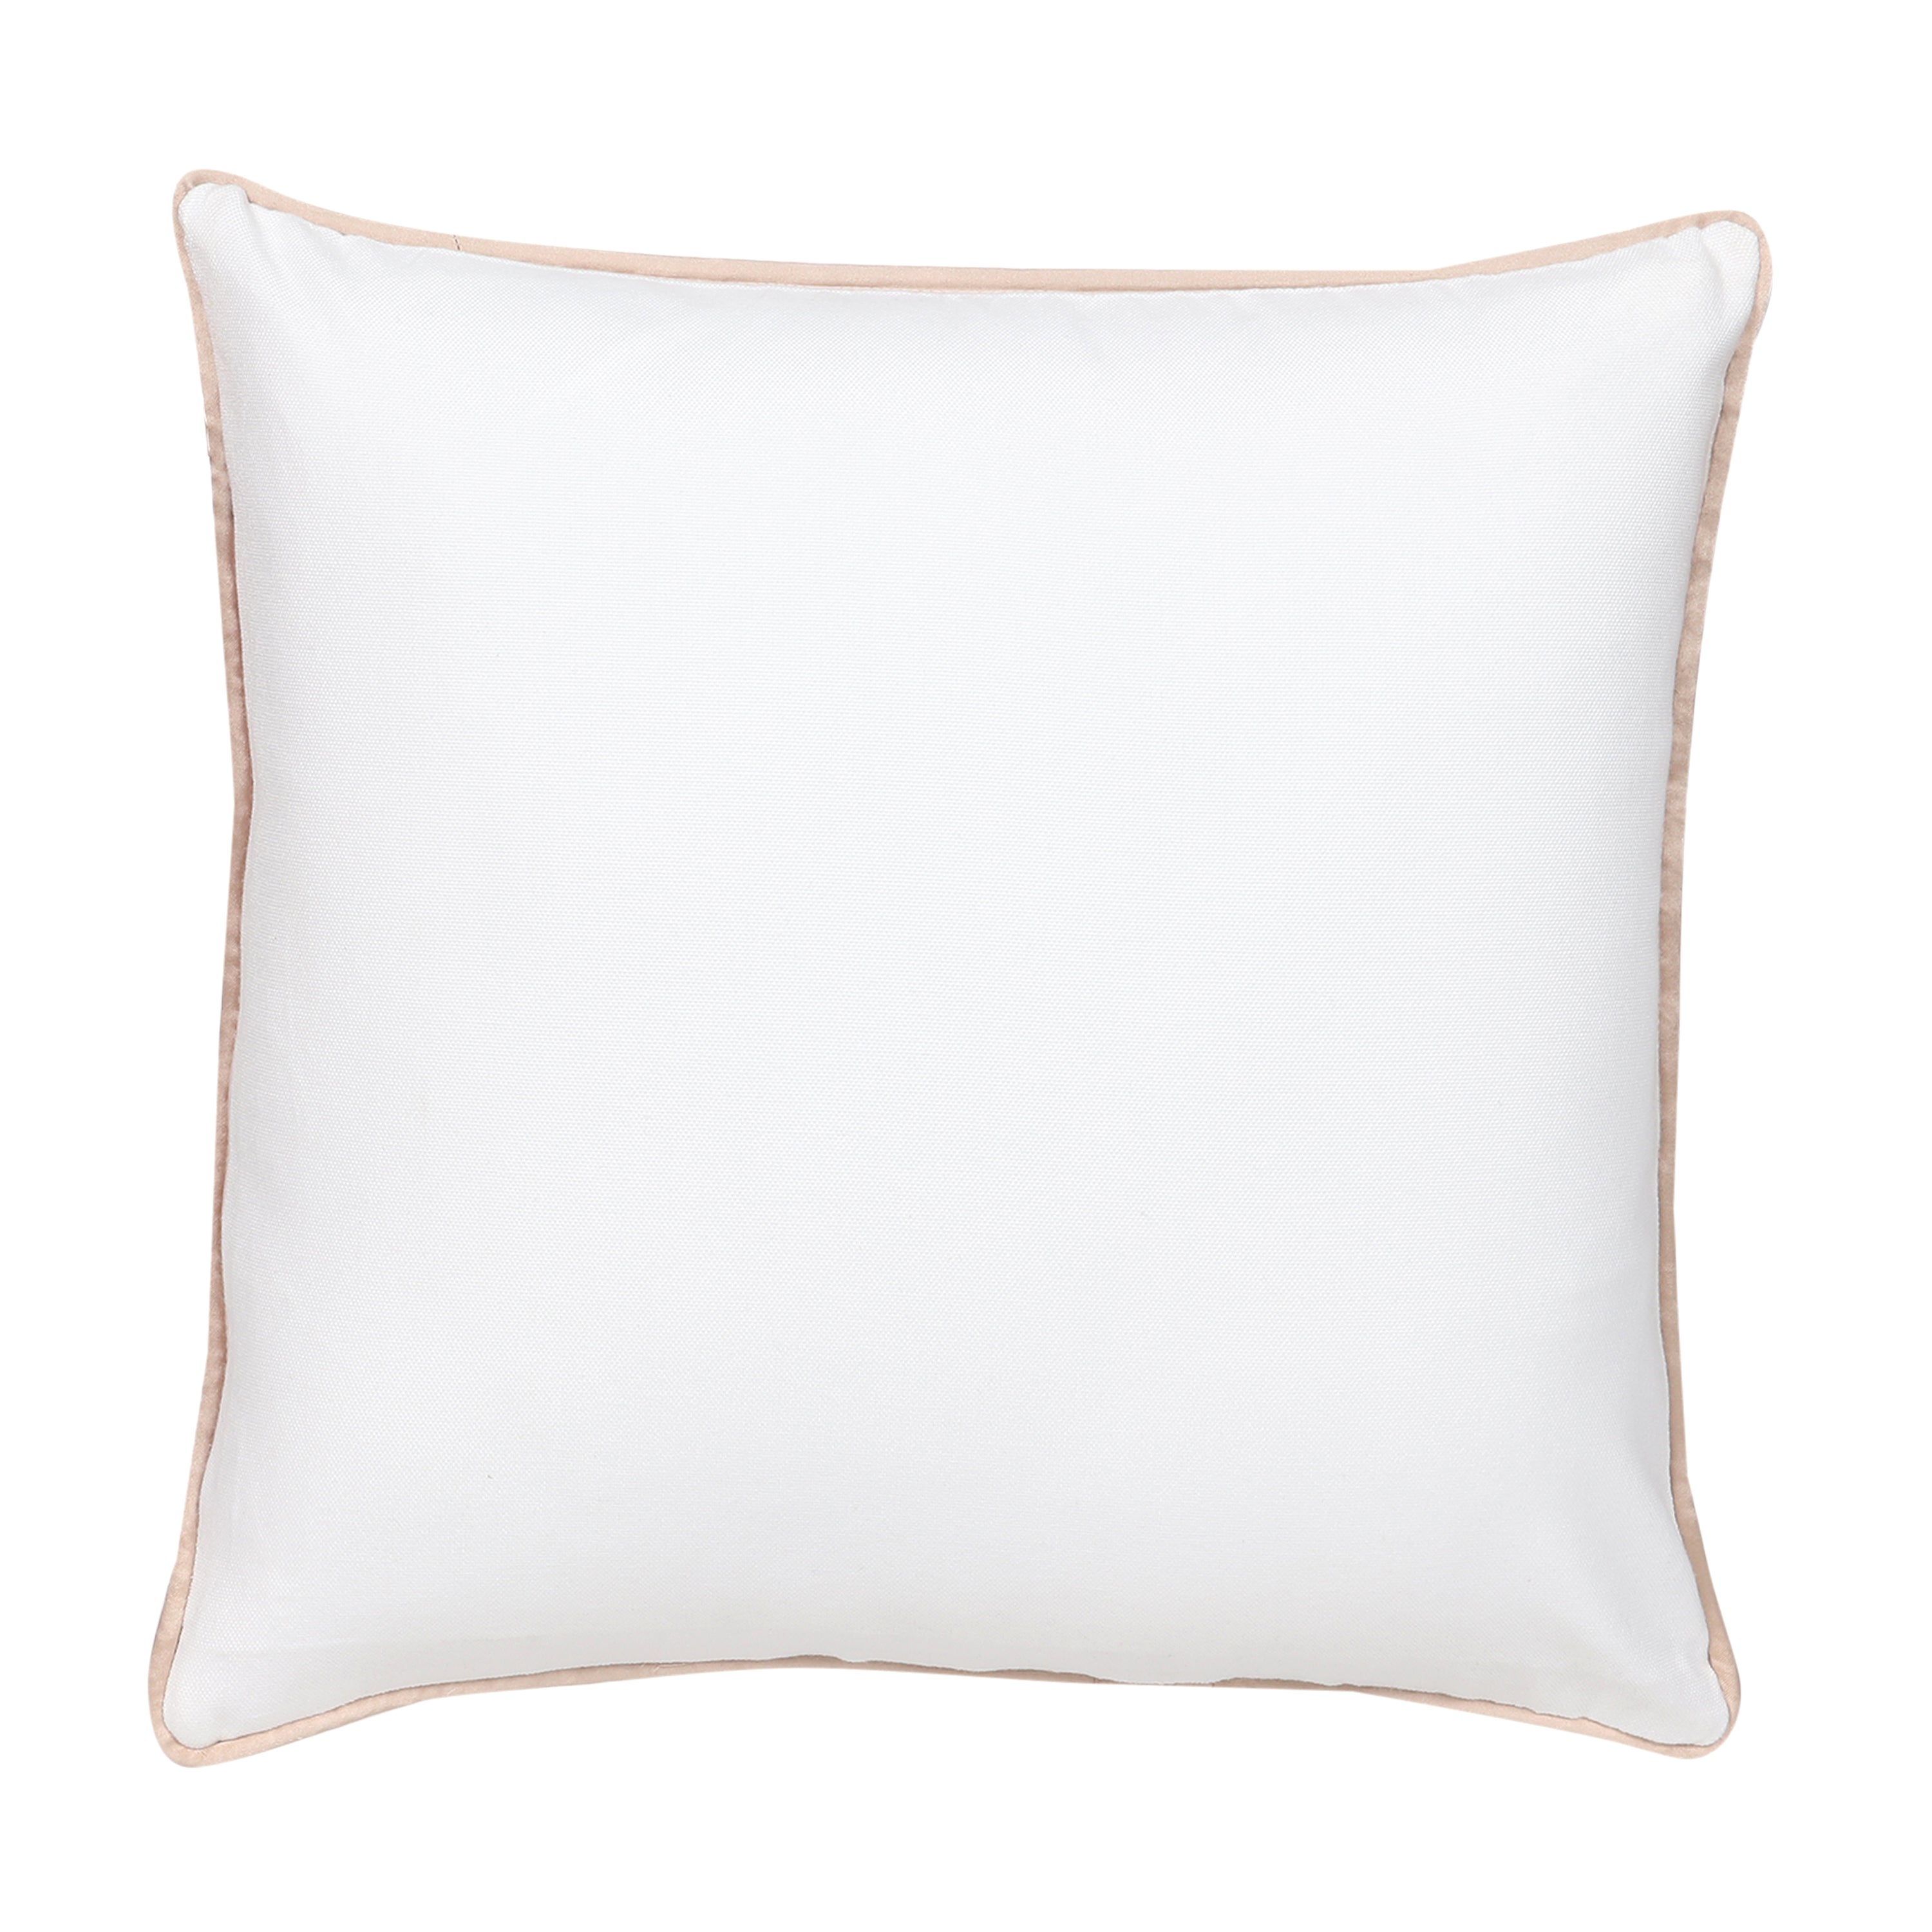 Line Art Embroidered Cushion Cover - Rise and Thrive